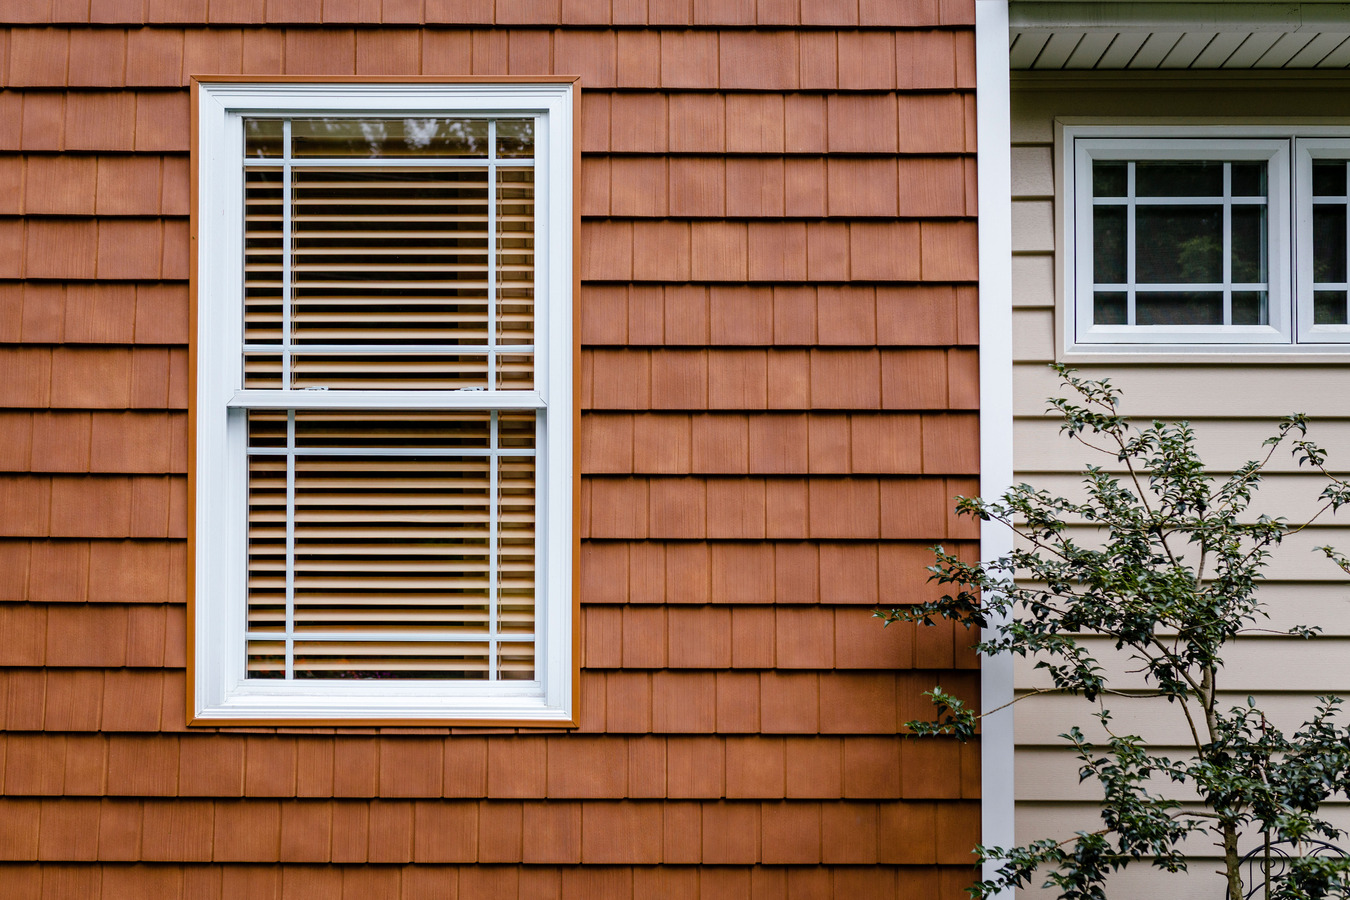 Home Maintenance Series: How to Find your Window Identification Number